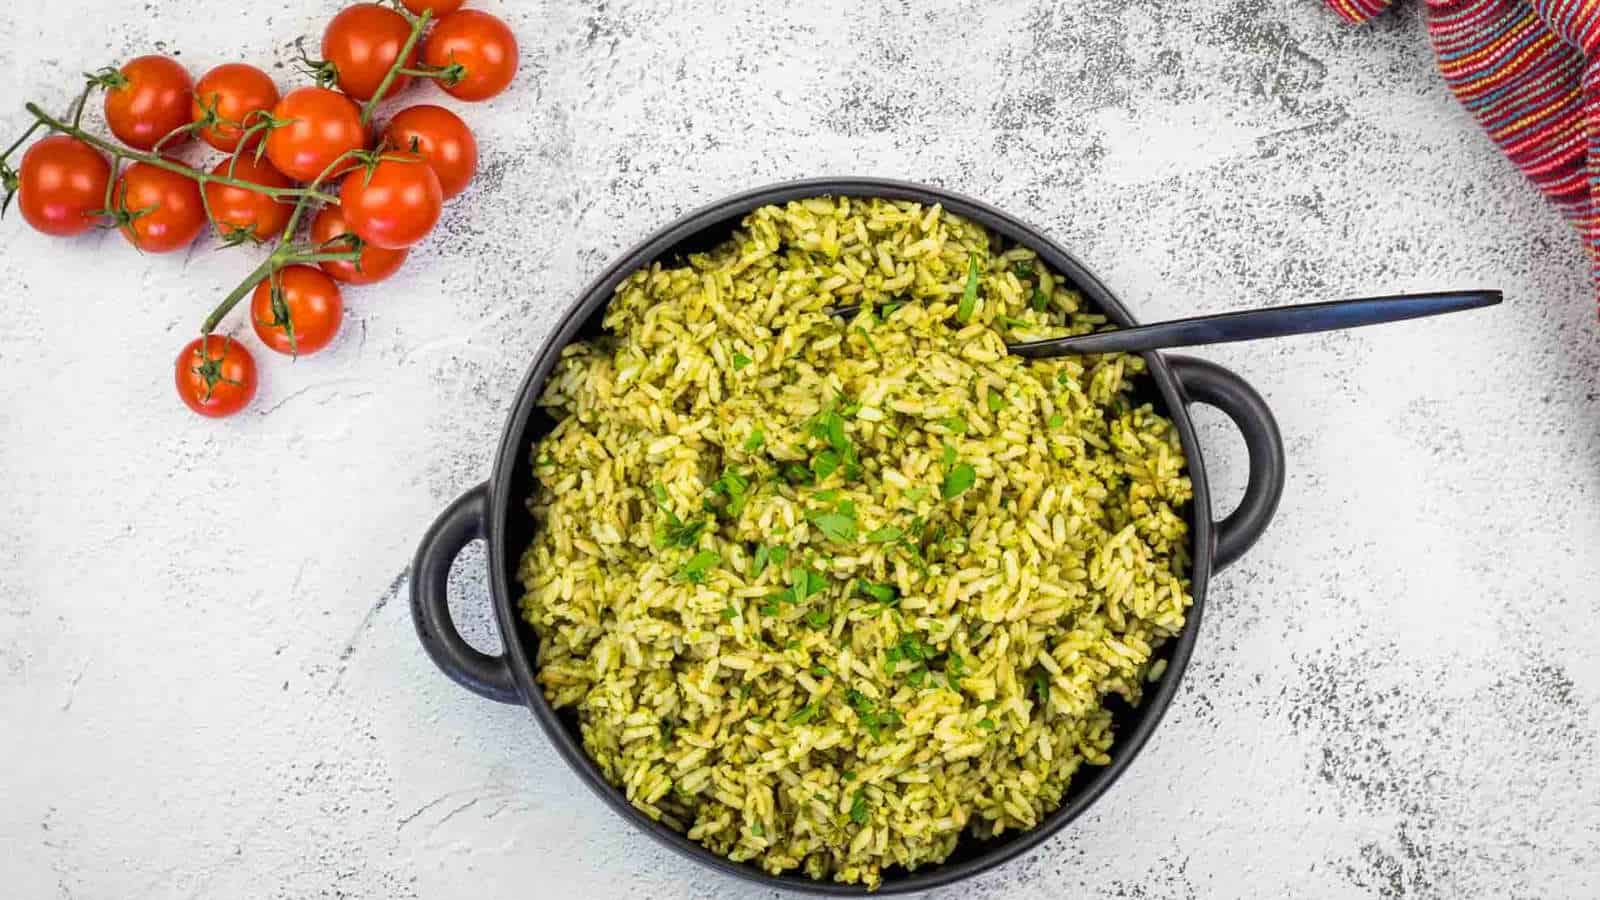 Arroz Verde rice in a black pan with tomatoes and herbs.